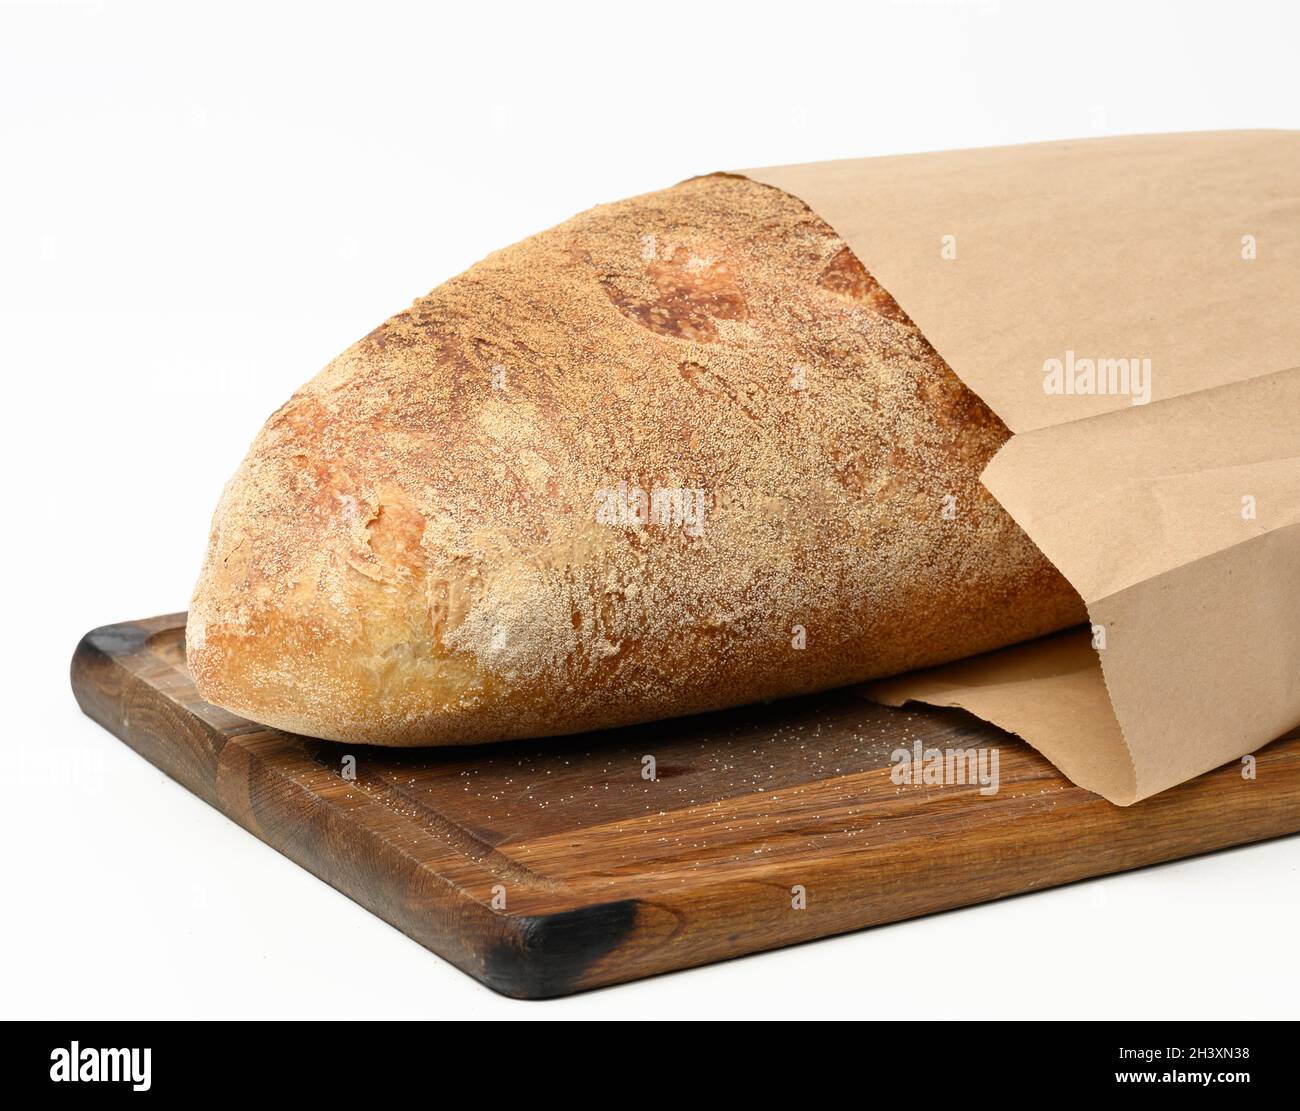 Whole baked oval bread made from white wheat flour in a paper bag on a wooden board Stock Photo